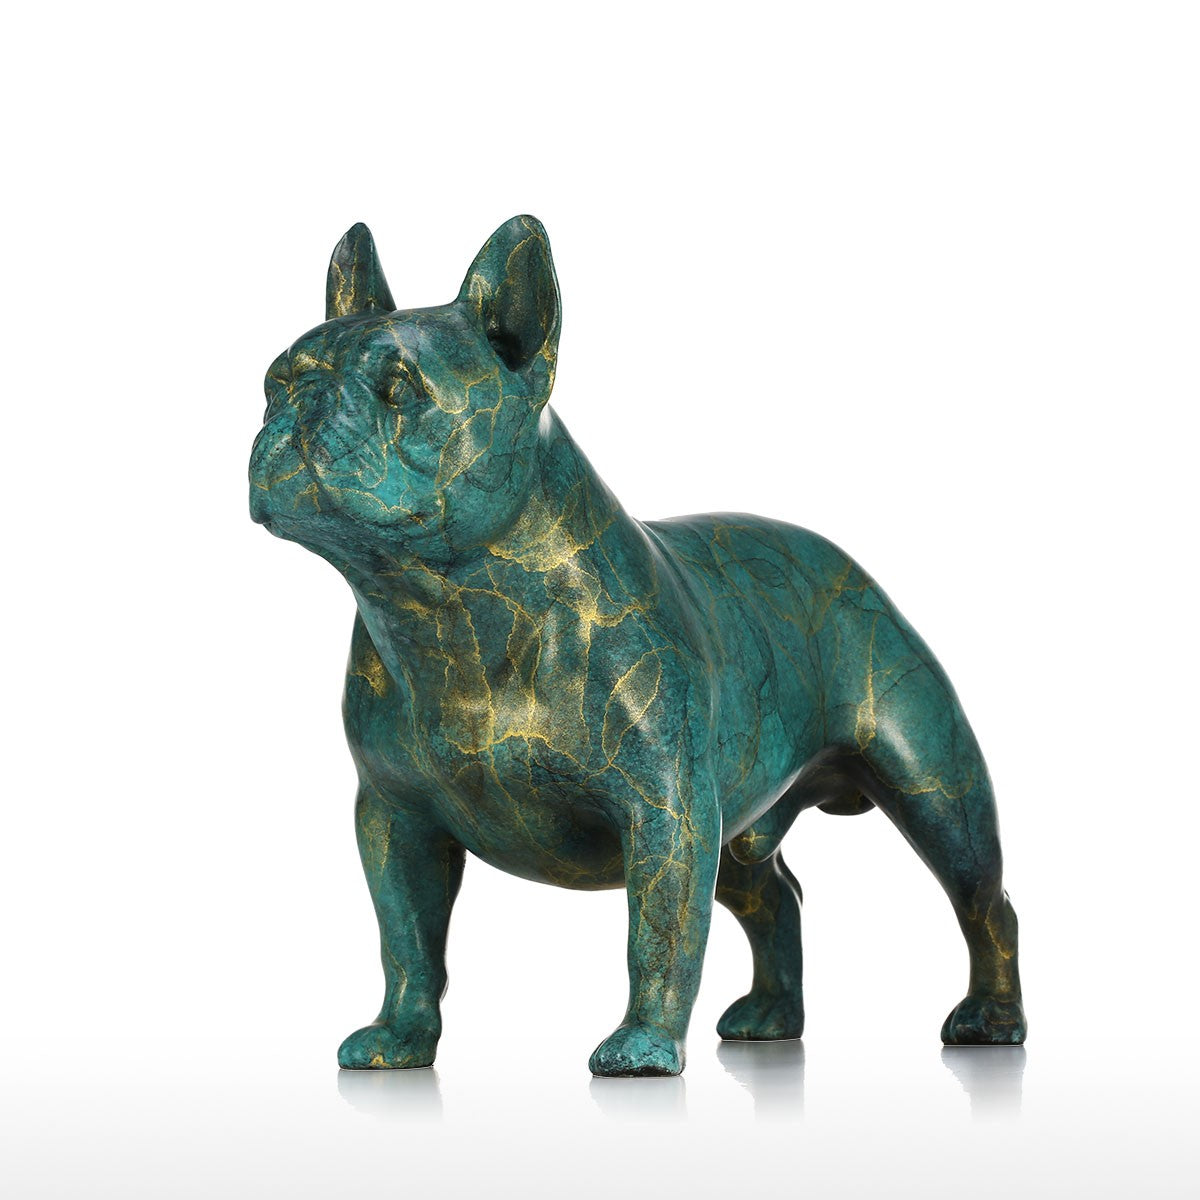 French Bulldog Christmas and Luxury Christmas Decorations with French Bulldog Statue for Christmas Decorations